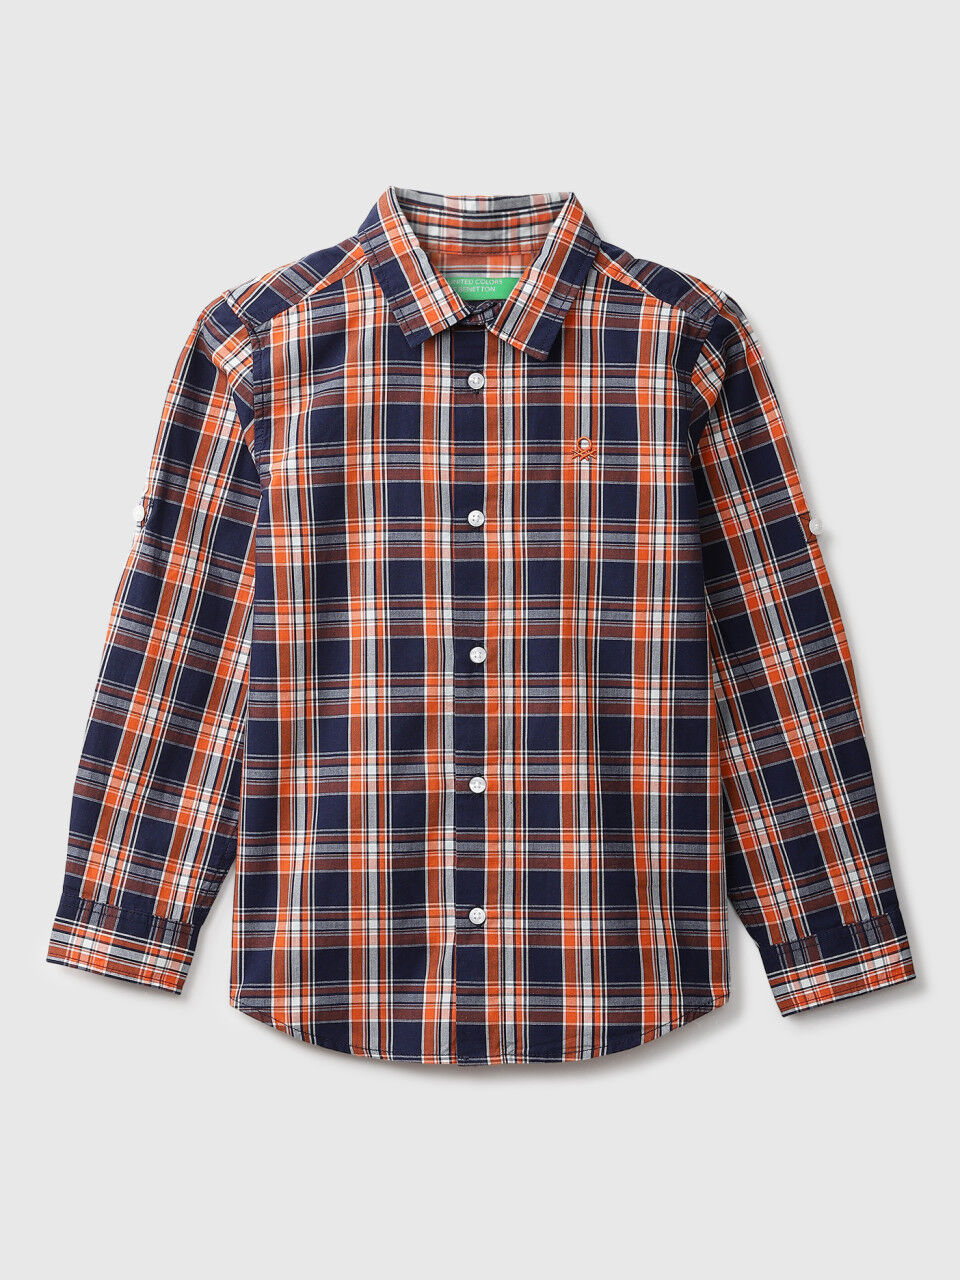 United Colors of Benetton Boys Casual Shirt 